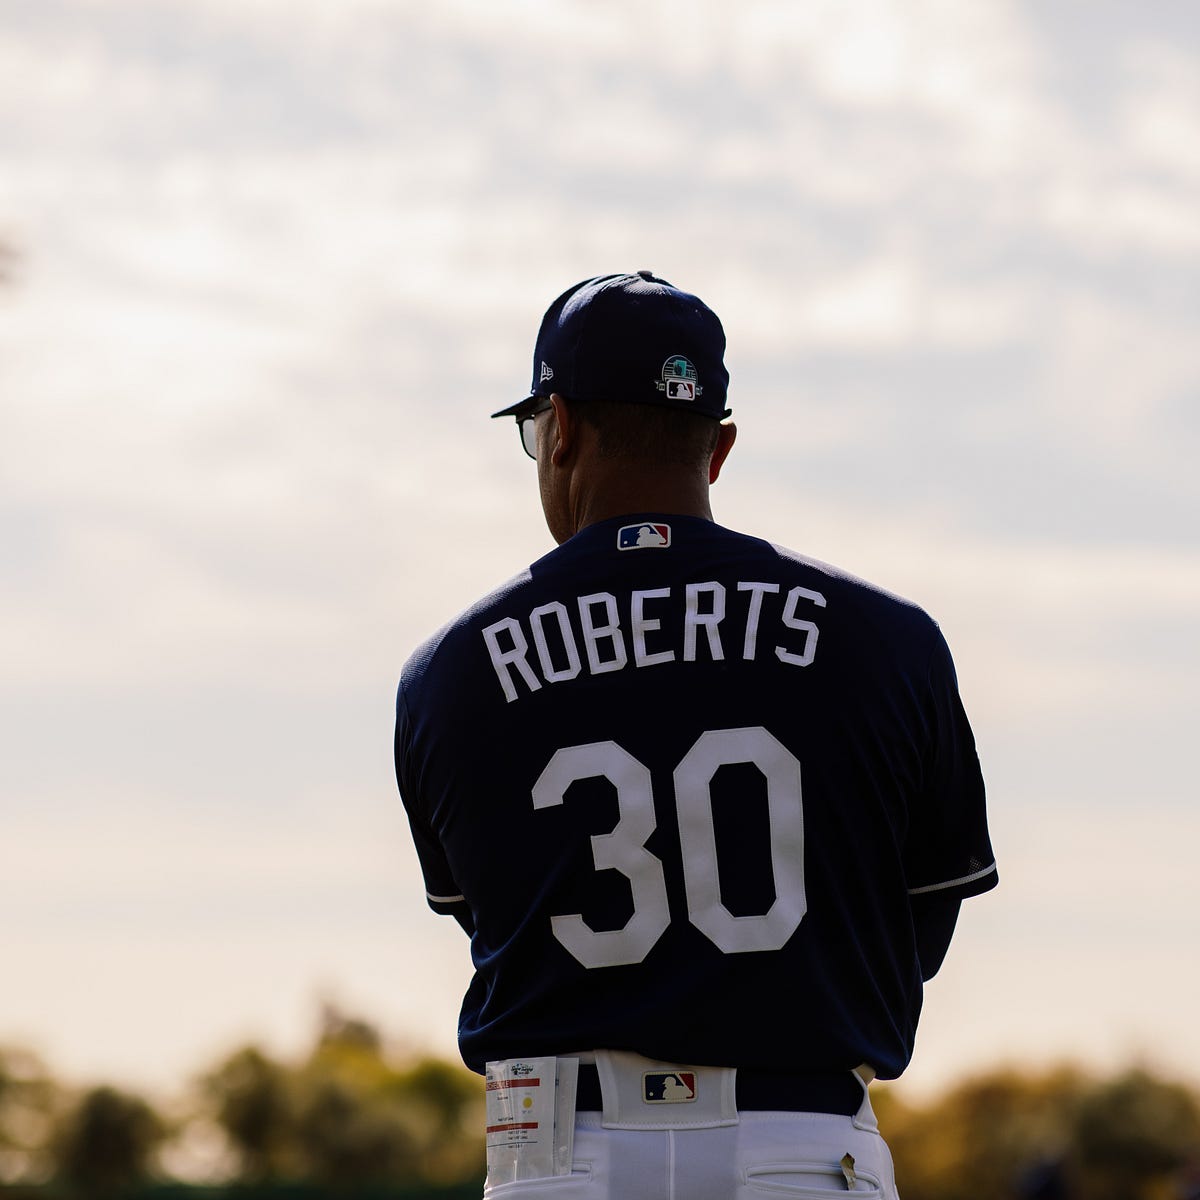 Dave Roberts on using his platform to speak out against injustice